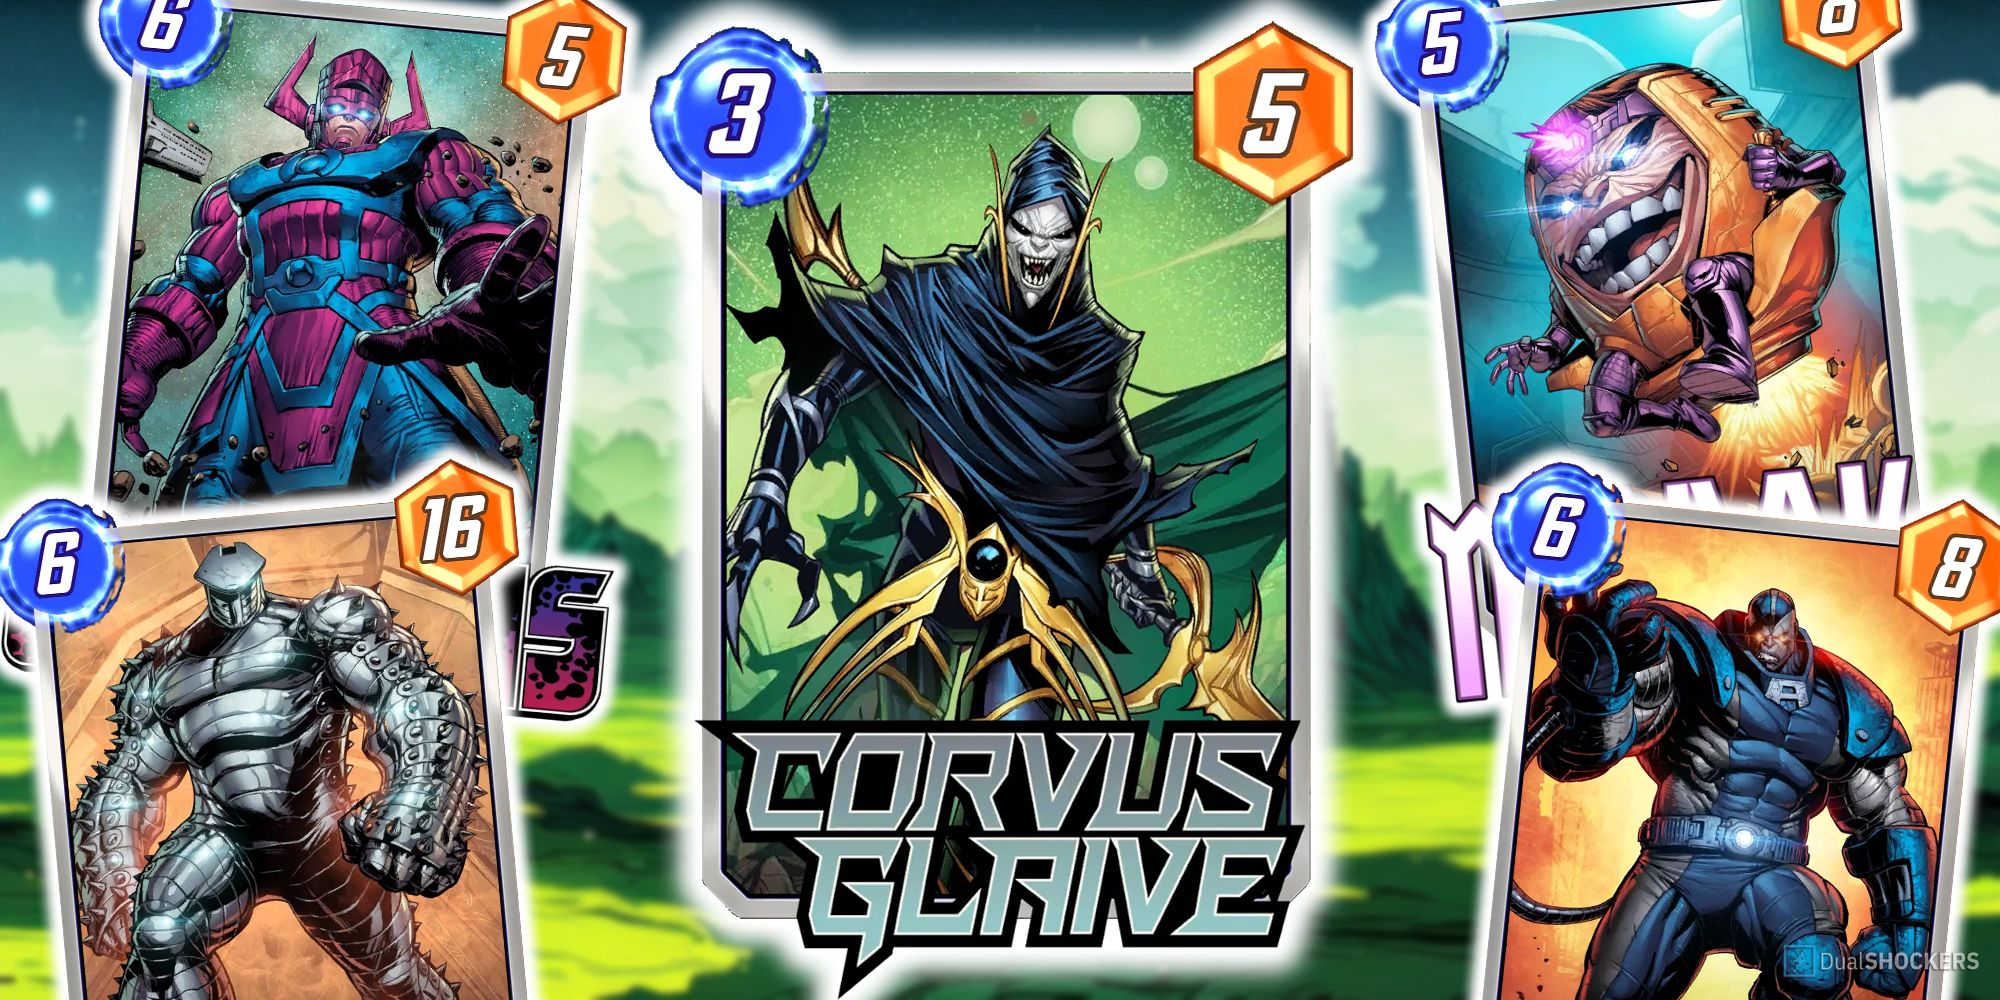 Marvel Snap's Corvus Glaive card surrounded by Galactus, Destroyer, M.O.D.O.K., and Apocalypse.